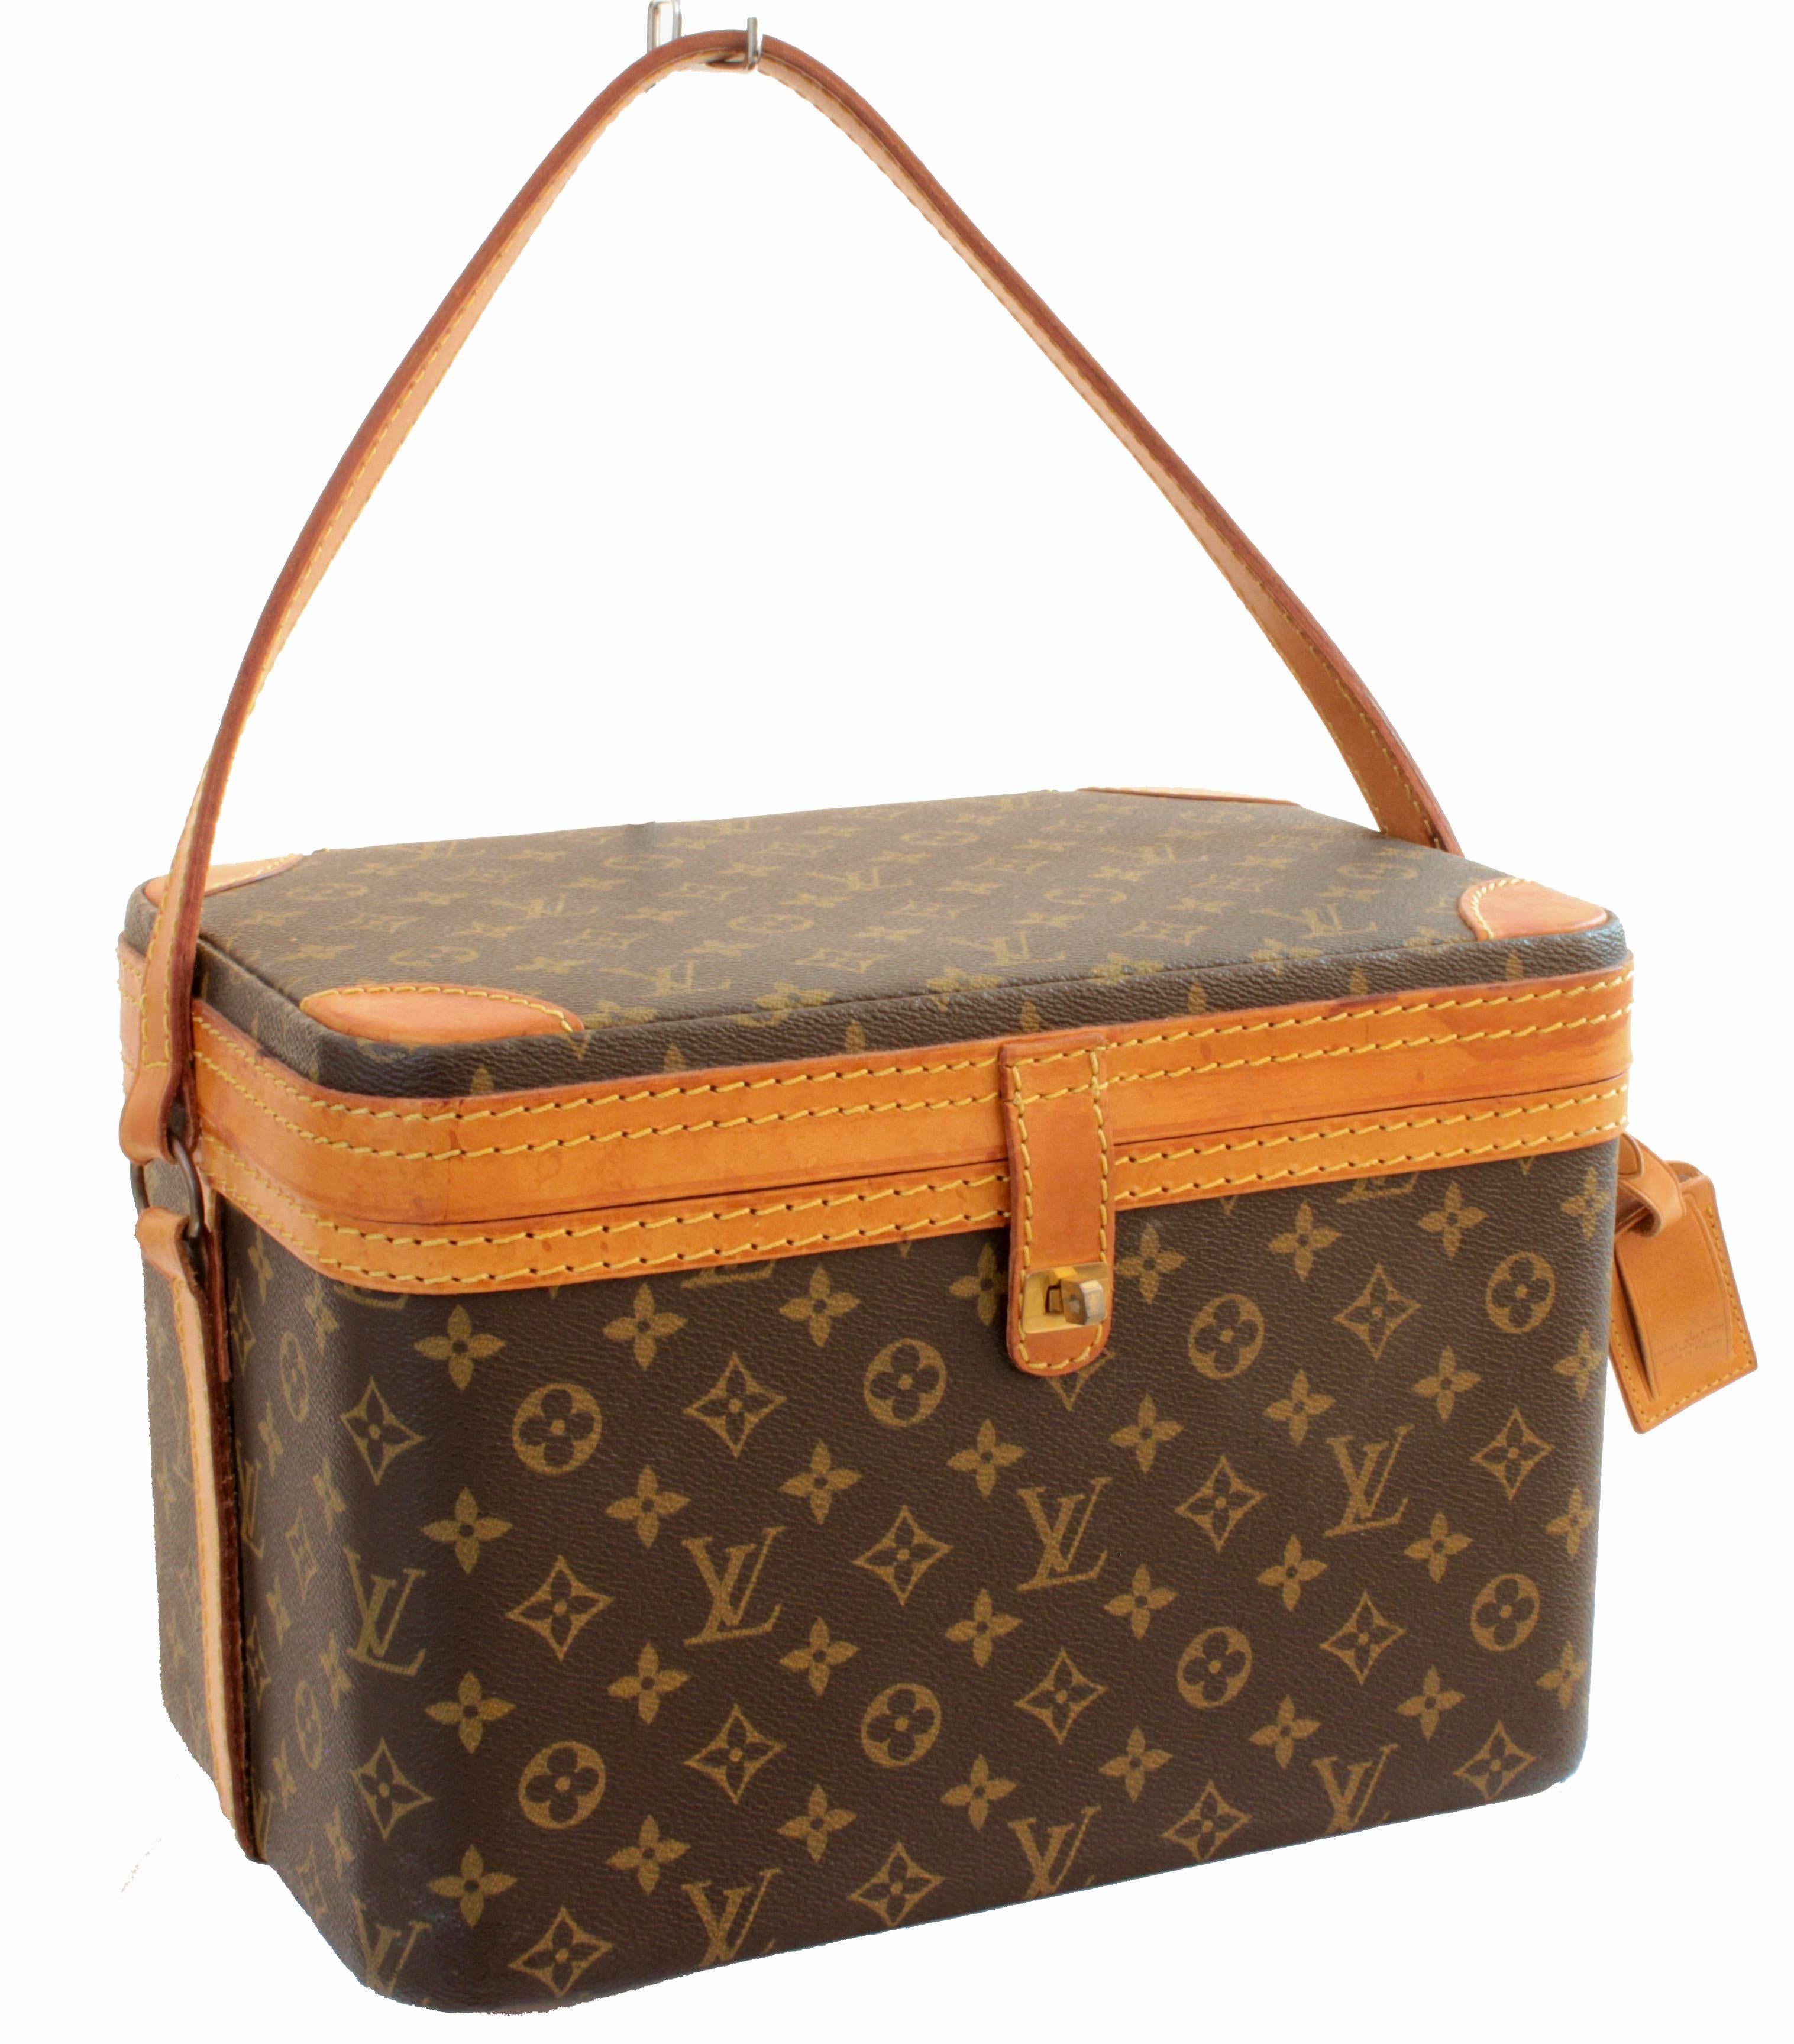 This fabulous and hard to find train case was made by Louis Vuitton in the early 1980s. Made from their signature monogram canvas, it's trimmed in vachetta leather and fastens with a gold metal turn lock. The interior is lined in cream fabric and it